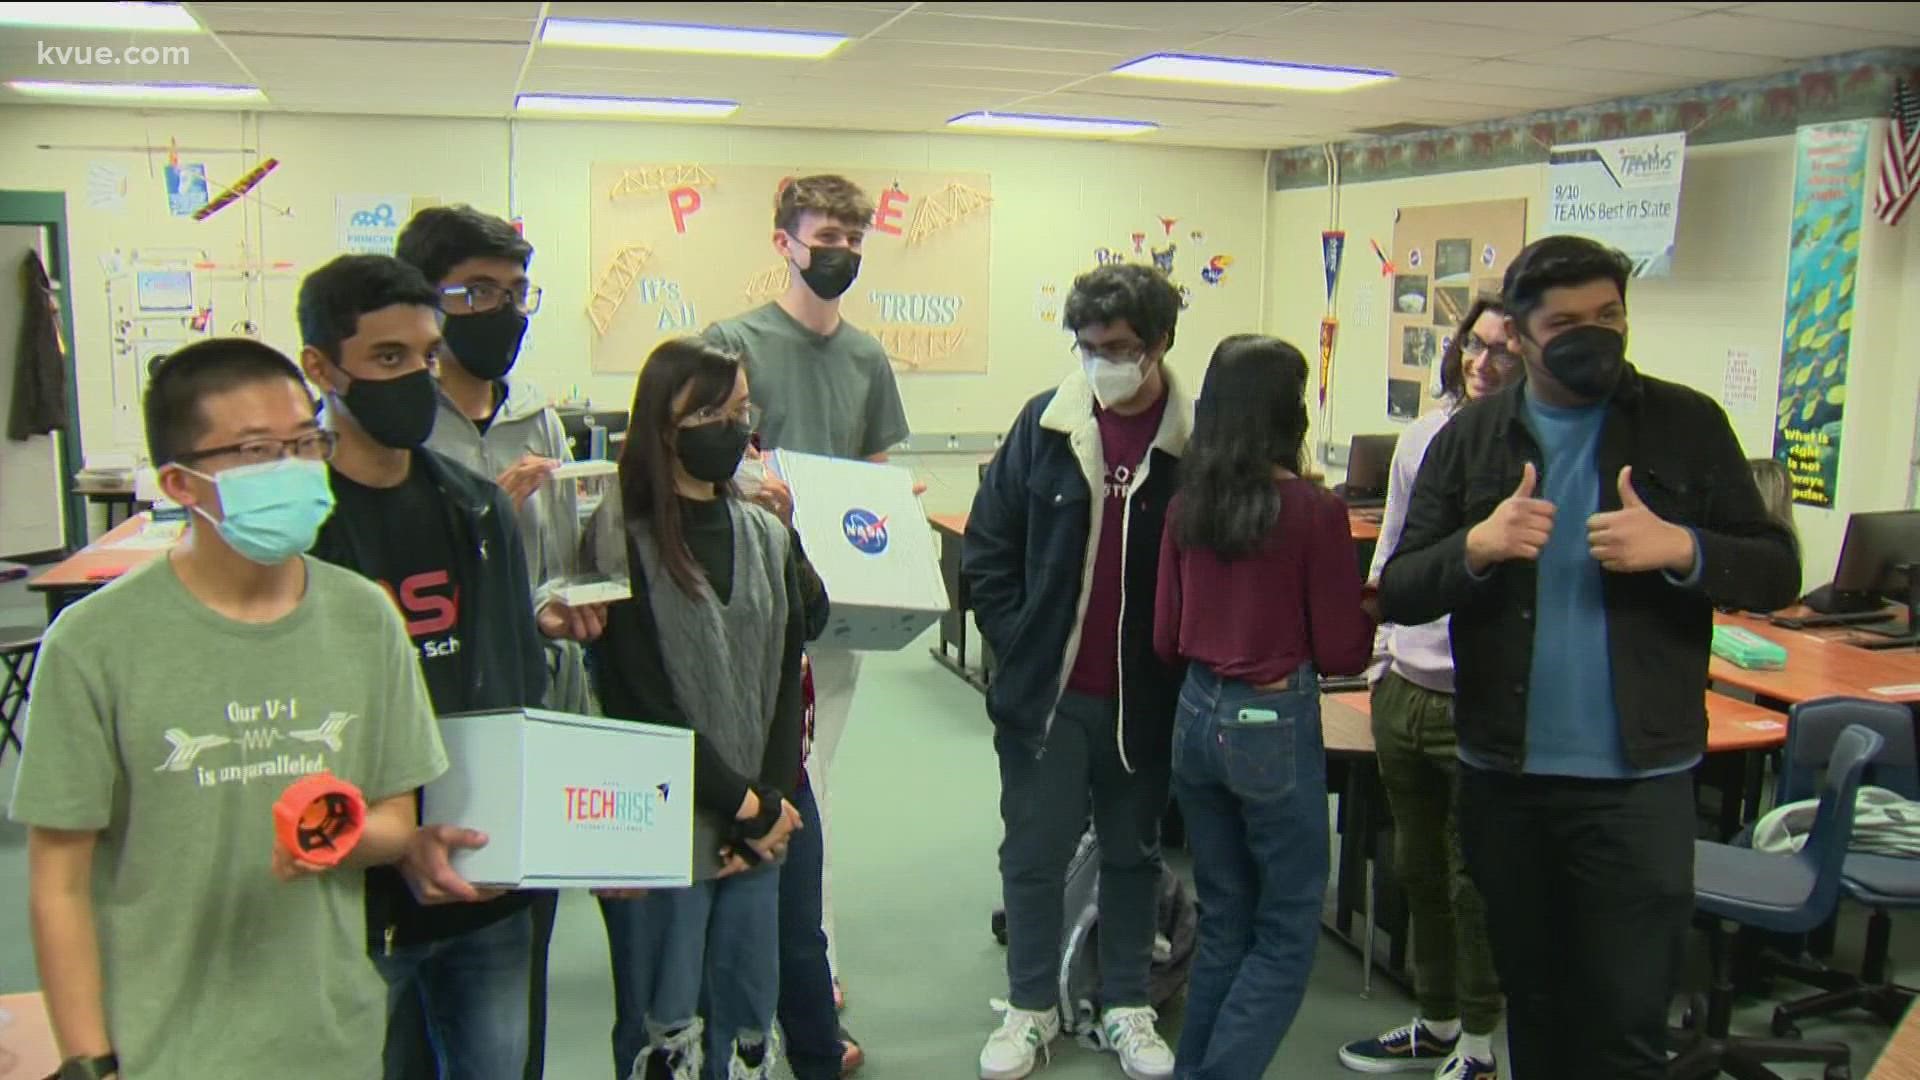 The McNeil Robotics Team was one of 57 teams selected nationwide by NASA as a winner of the TechRise Student Challenge.